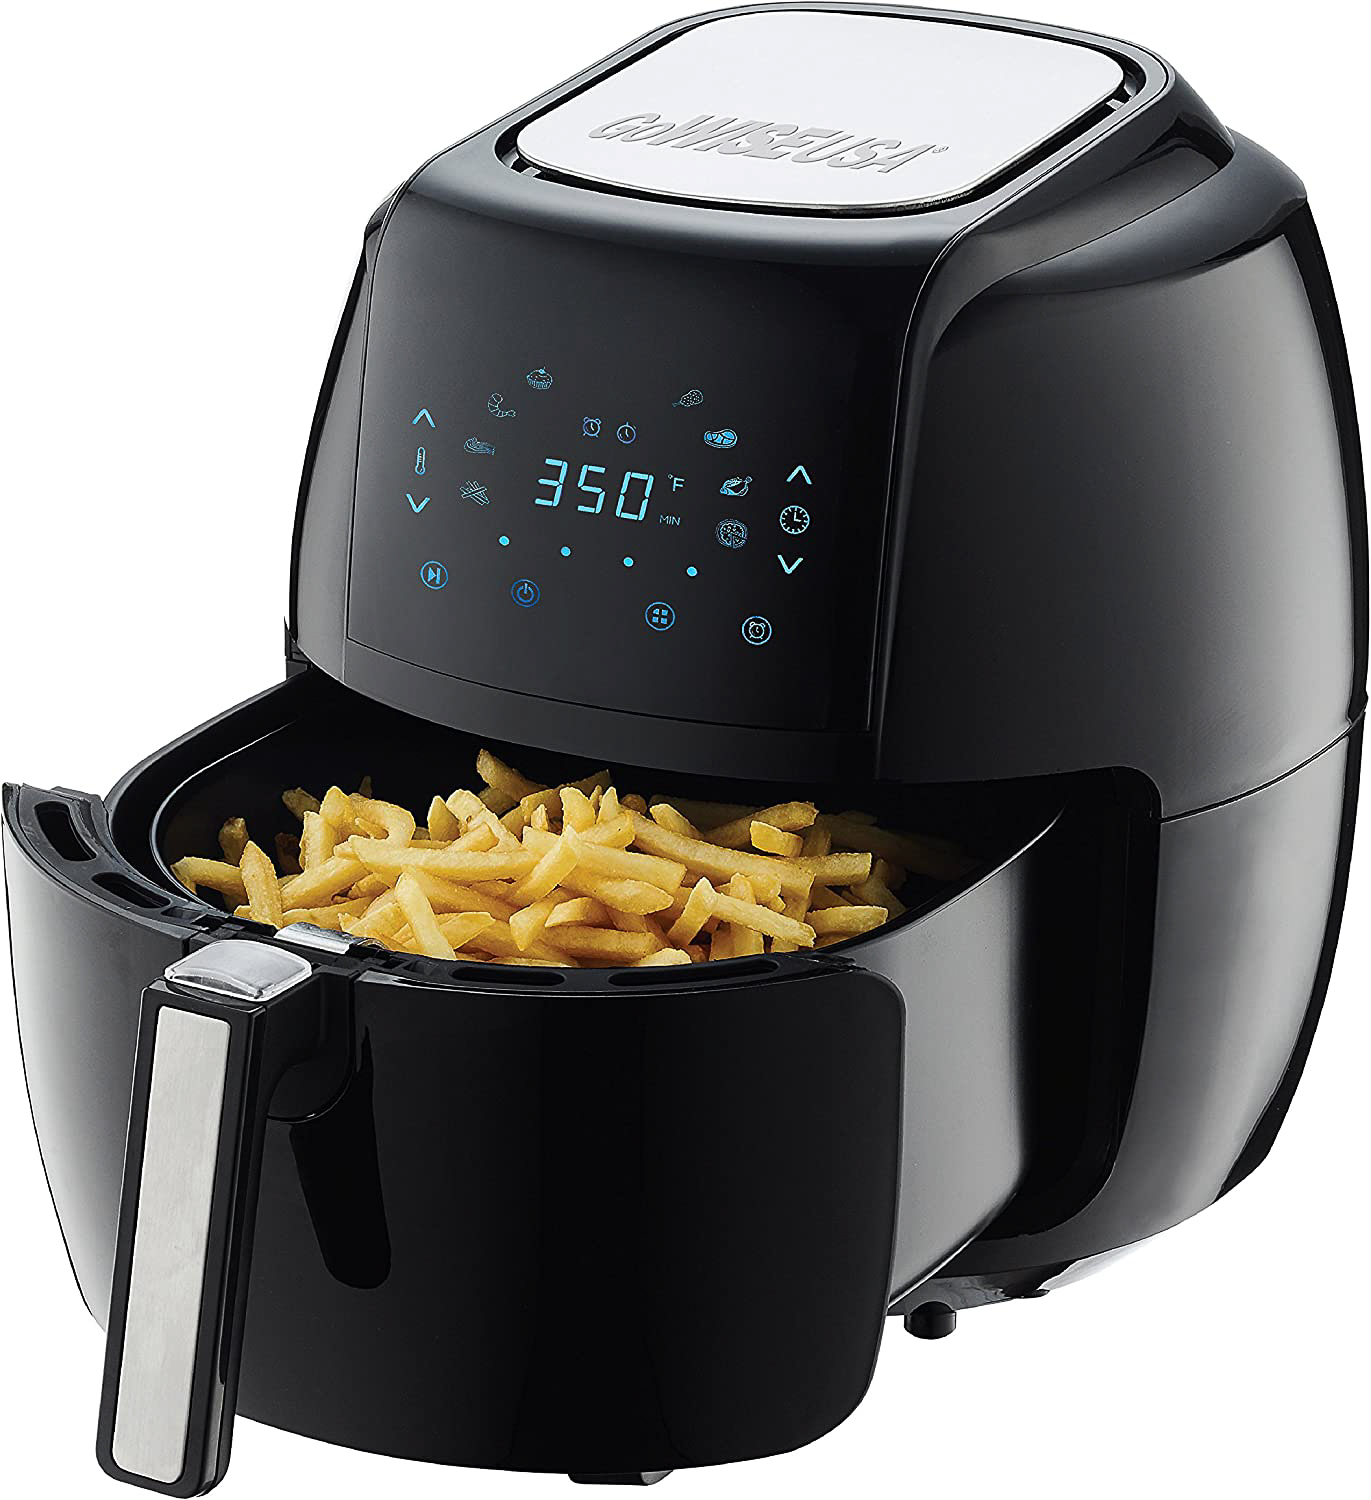 Here's Why You Shouldn't Spend More Than $100 on an Air Fryer - CNET